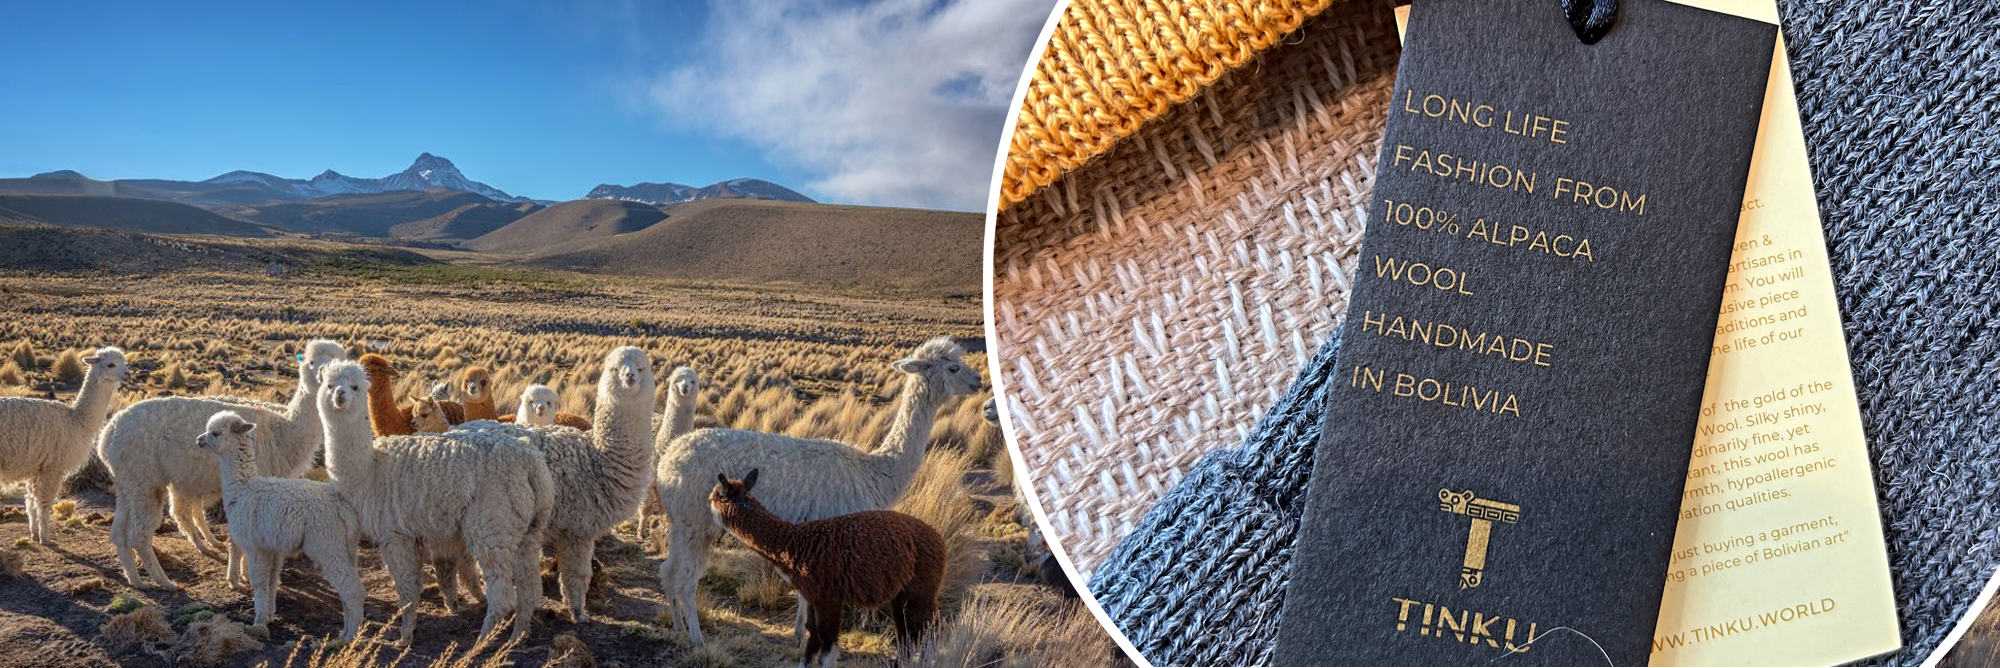 Tinku – Textile heritage from the Andes